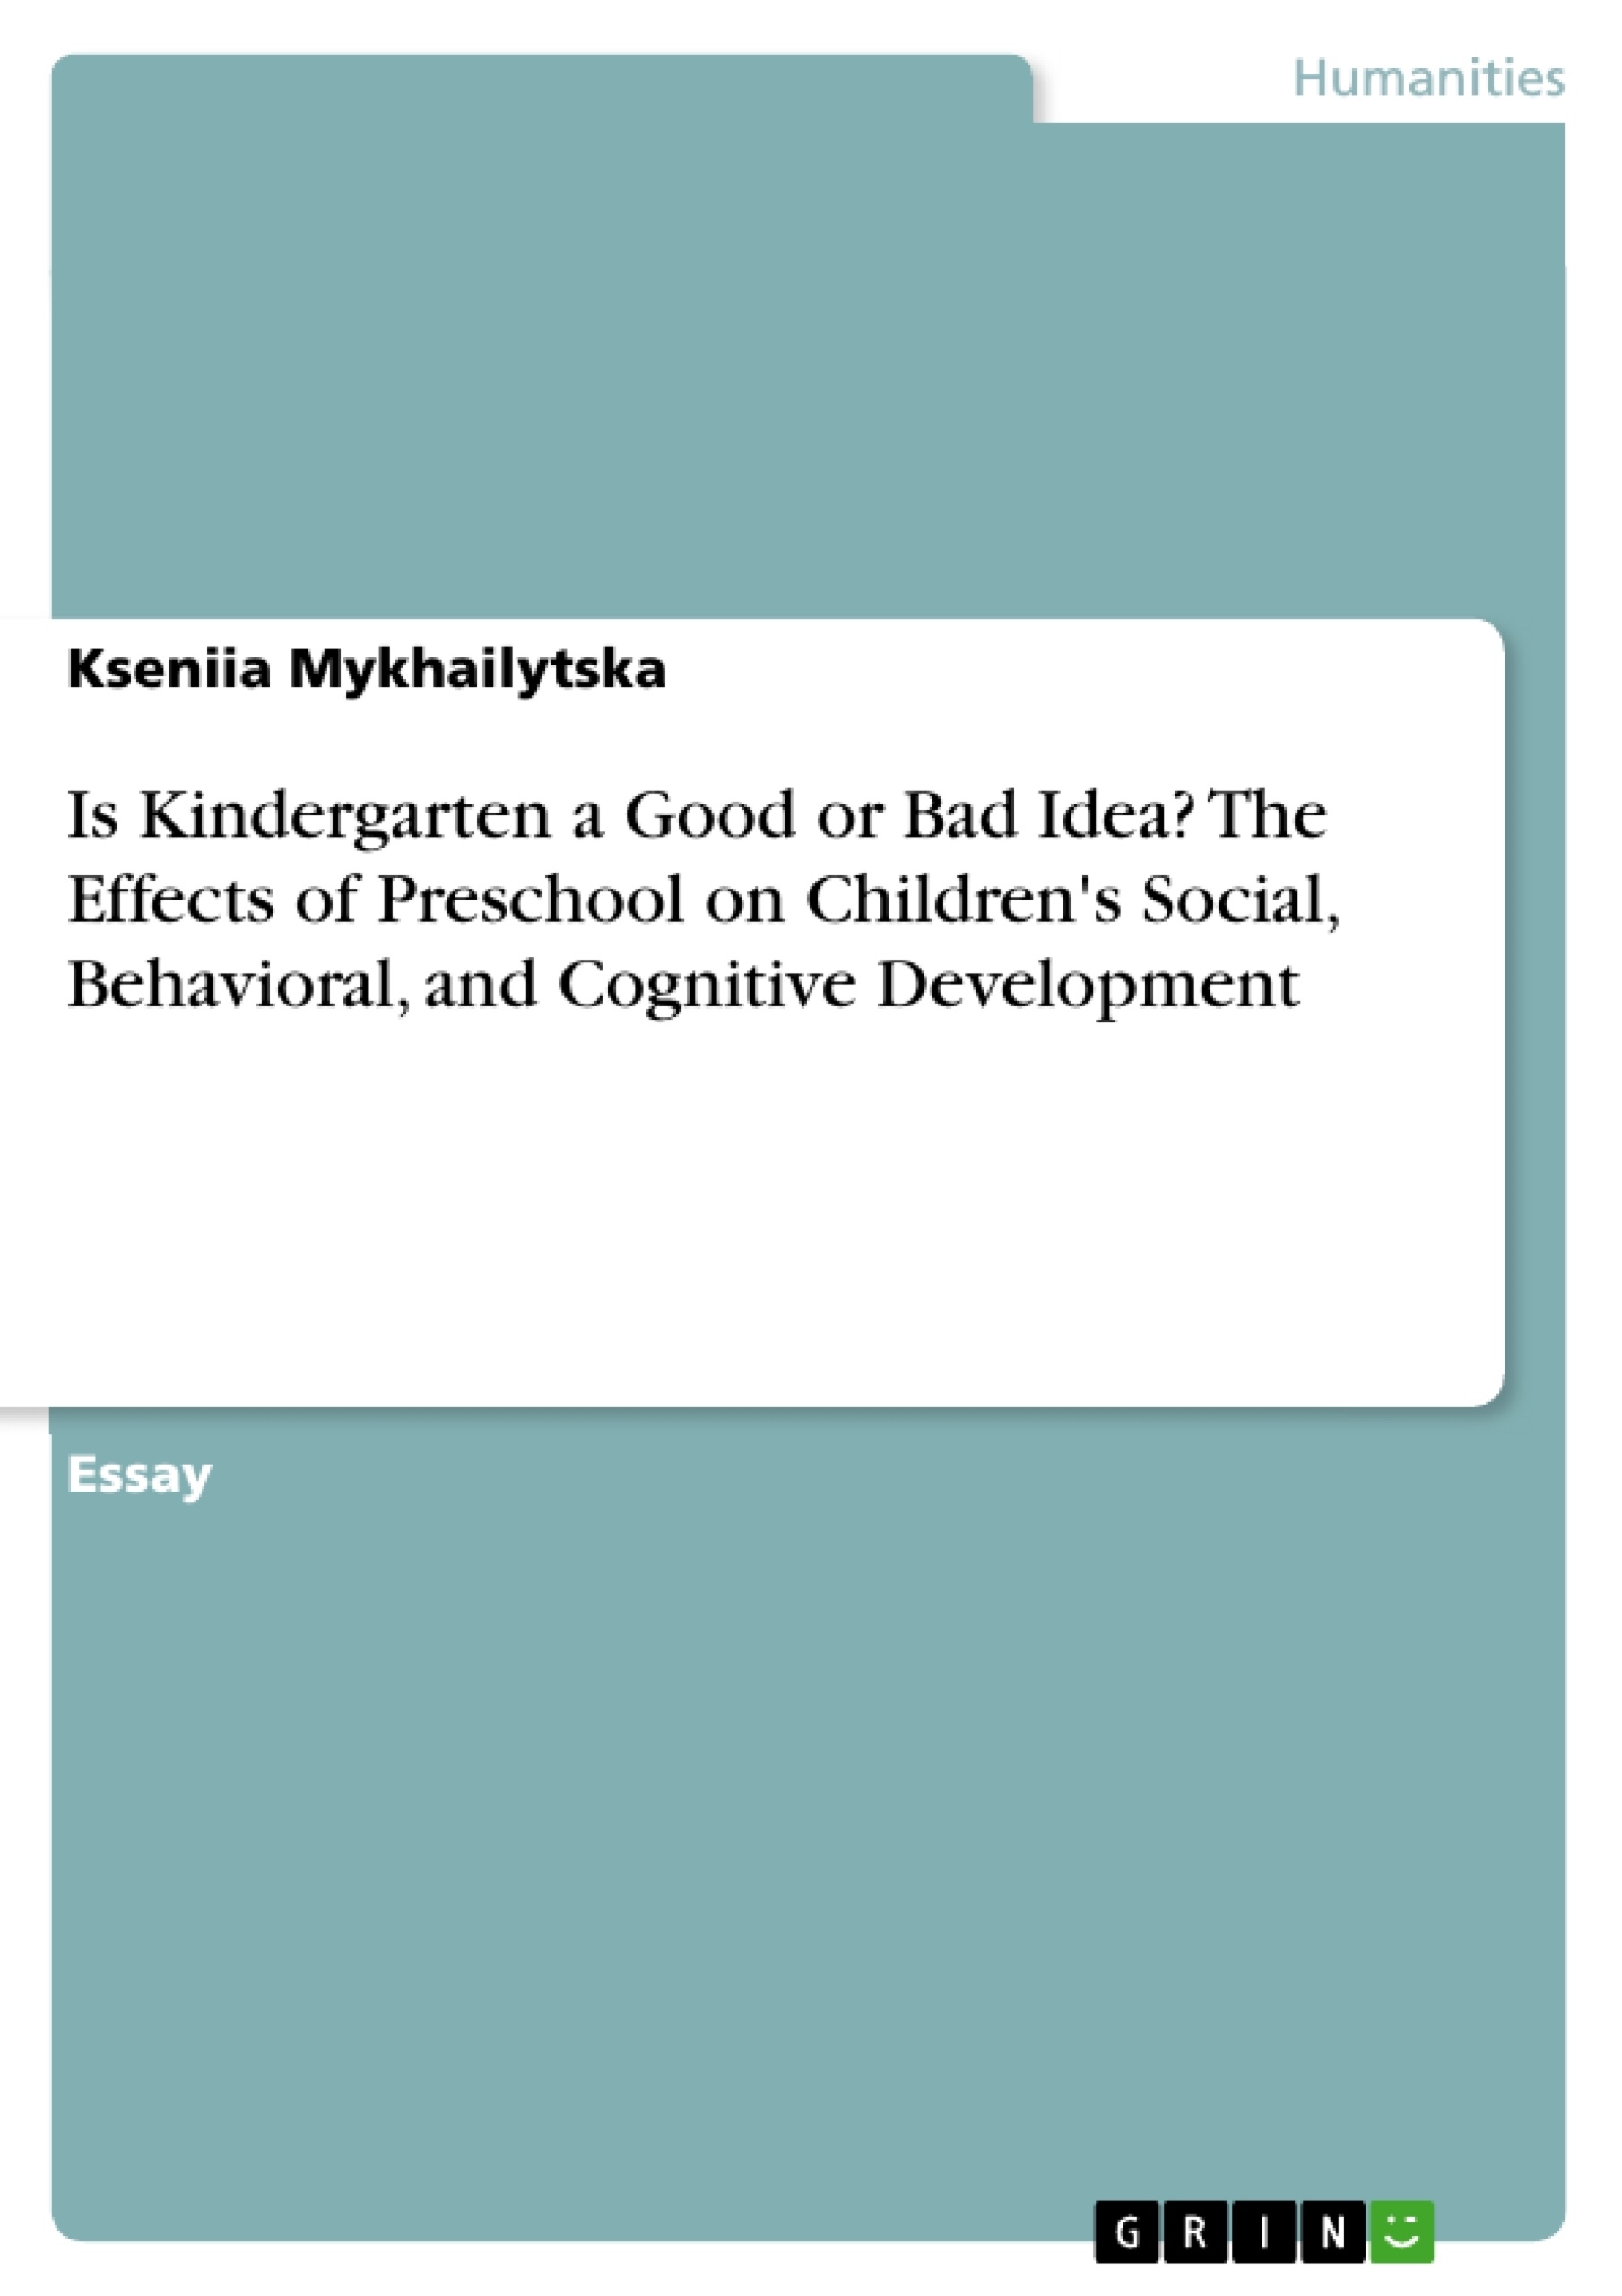 Title: Is Kindergarten a Good or Bad Idea? The Effects of Preschool on Children's Social, Behavioral, and Cognitive Development